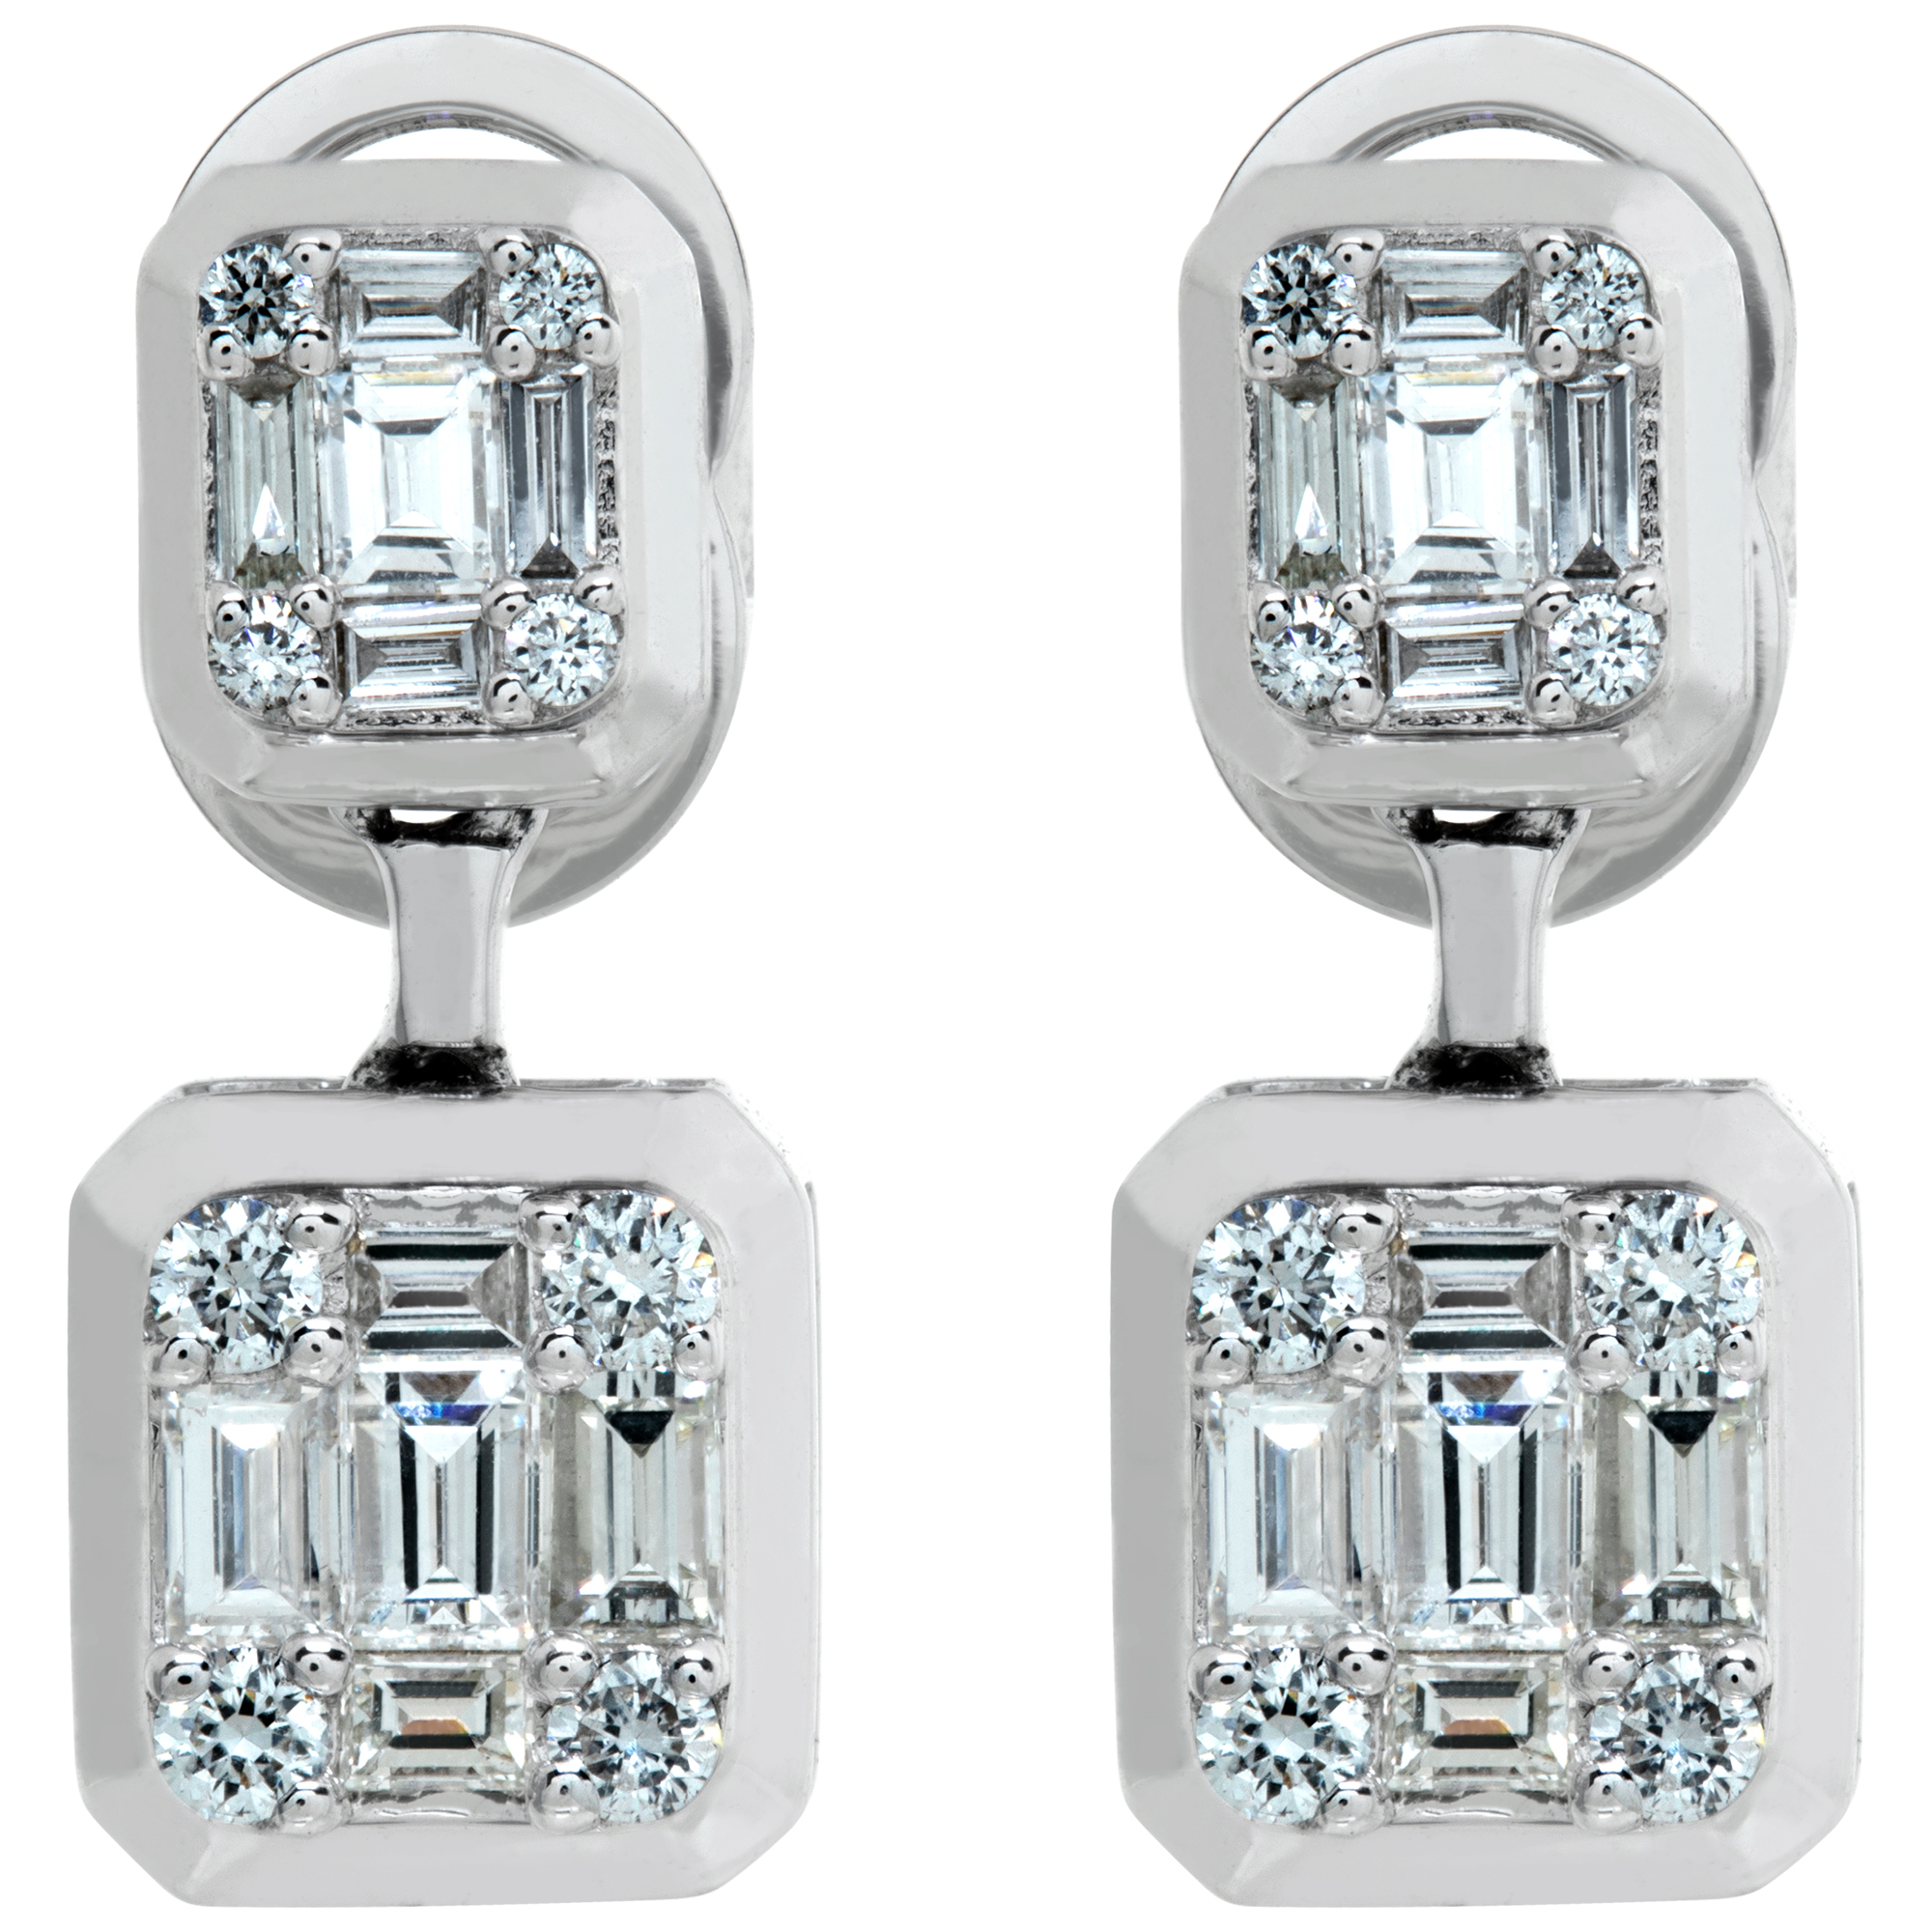 18k white gold illusion set diamond earrings with 0.86 carat in baguette & round cut diamonds